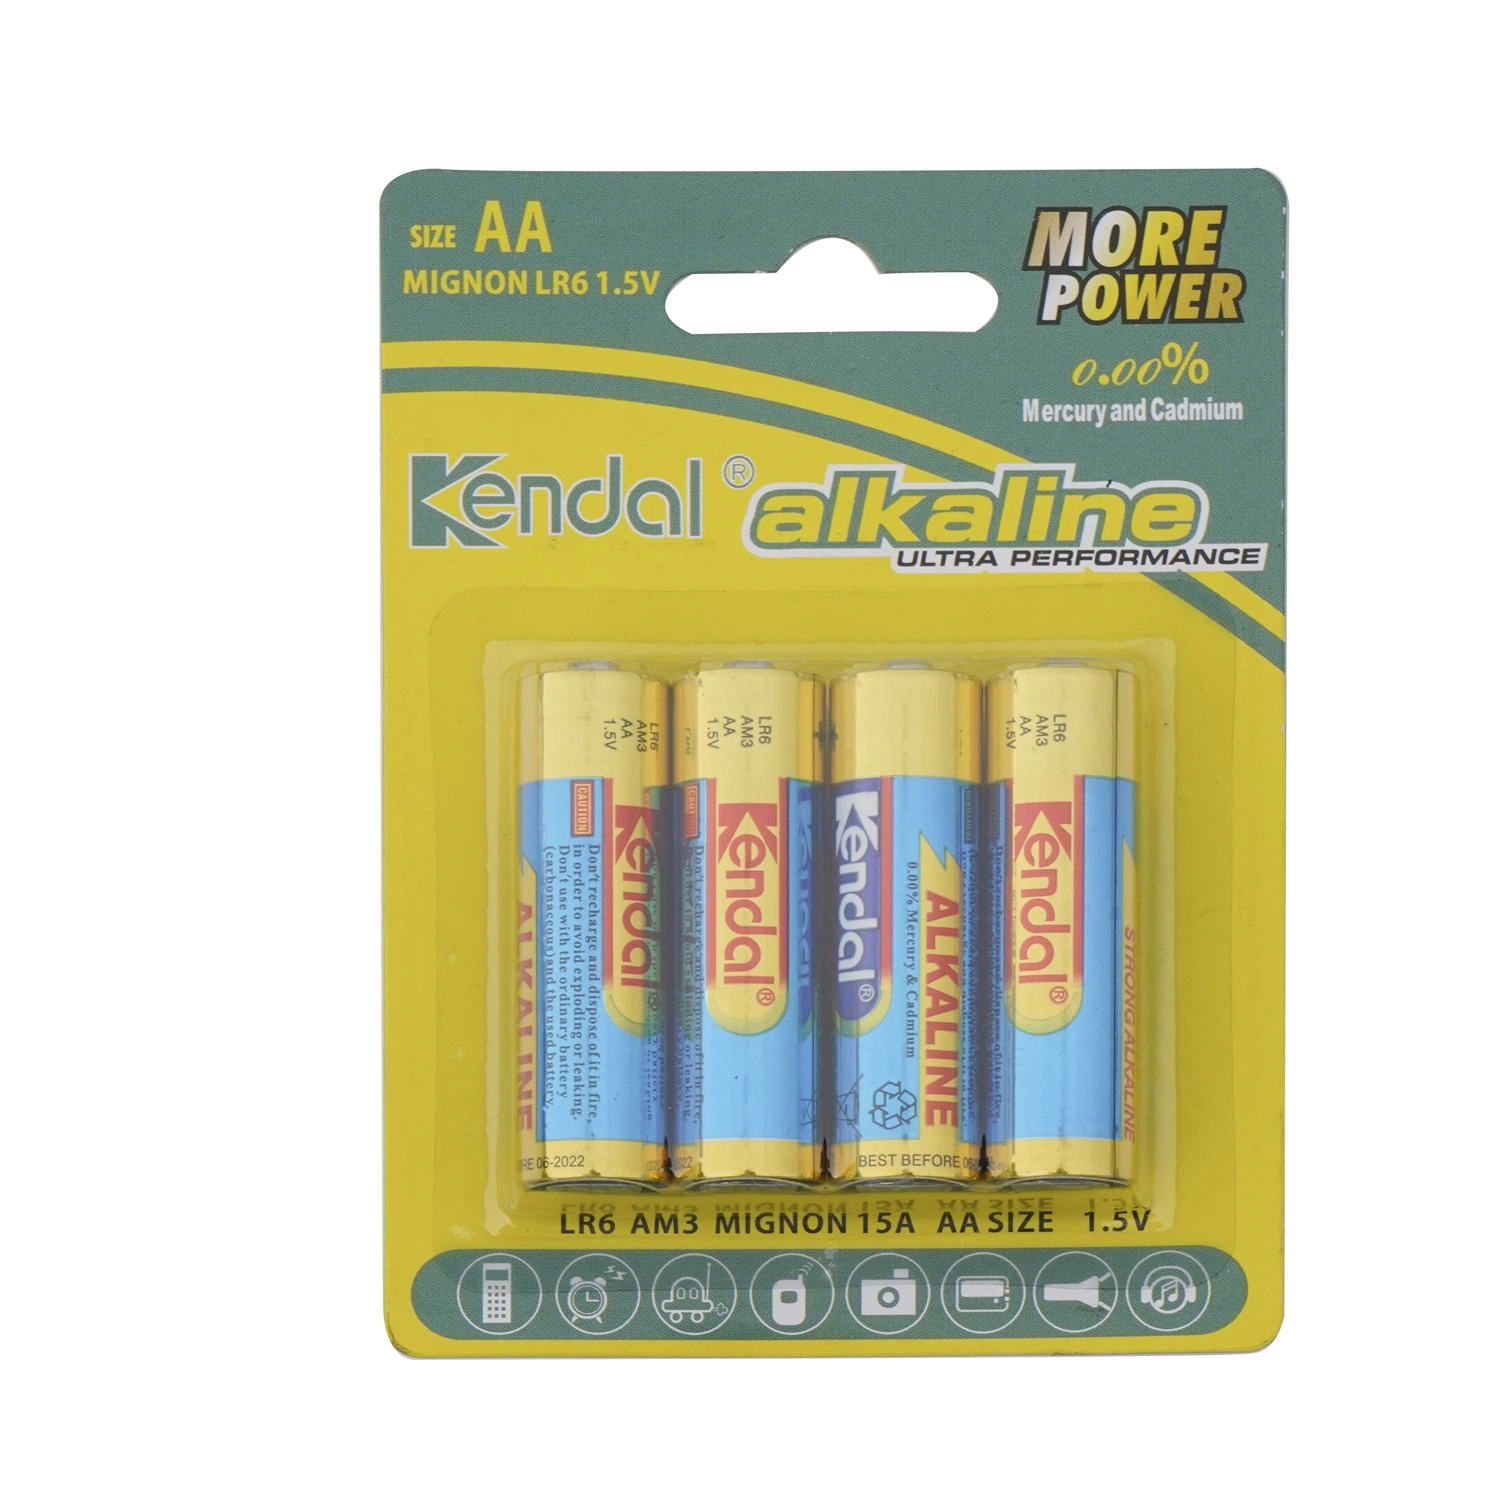 AA Lr6 Am4 1.5V Kendal Alkaline Dry Battery Thermometer Battery